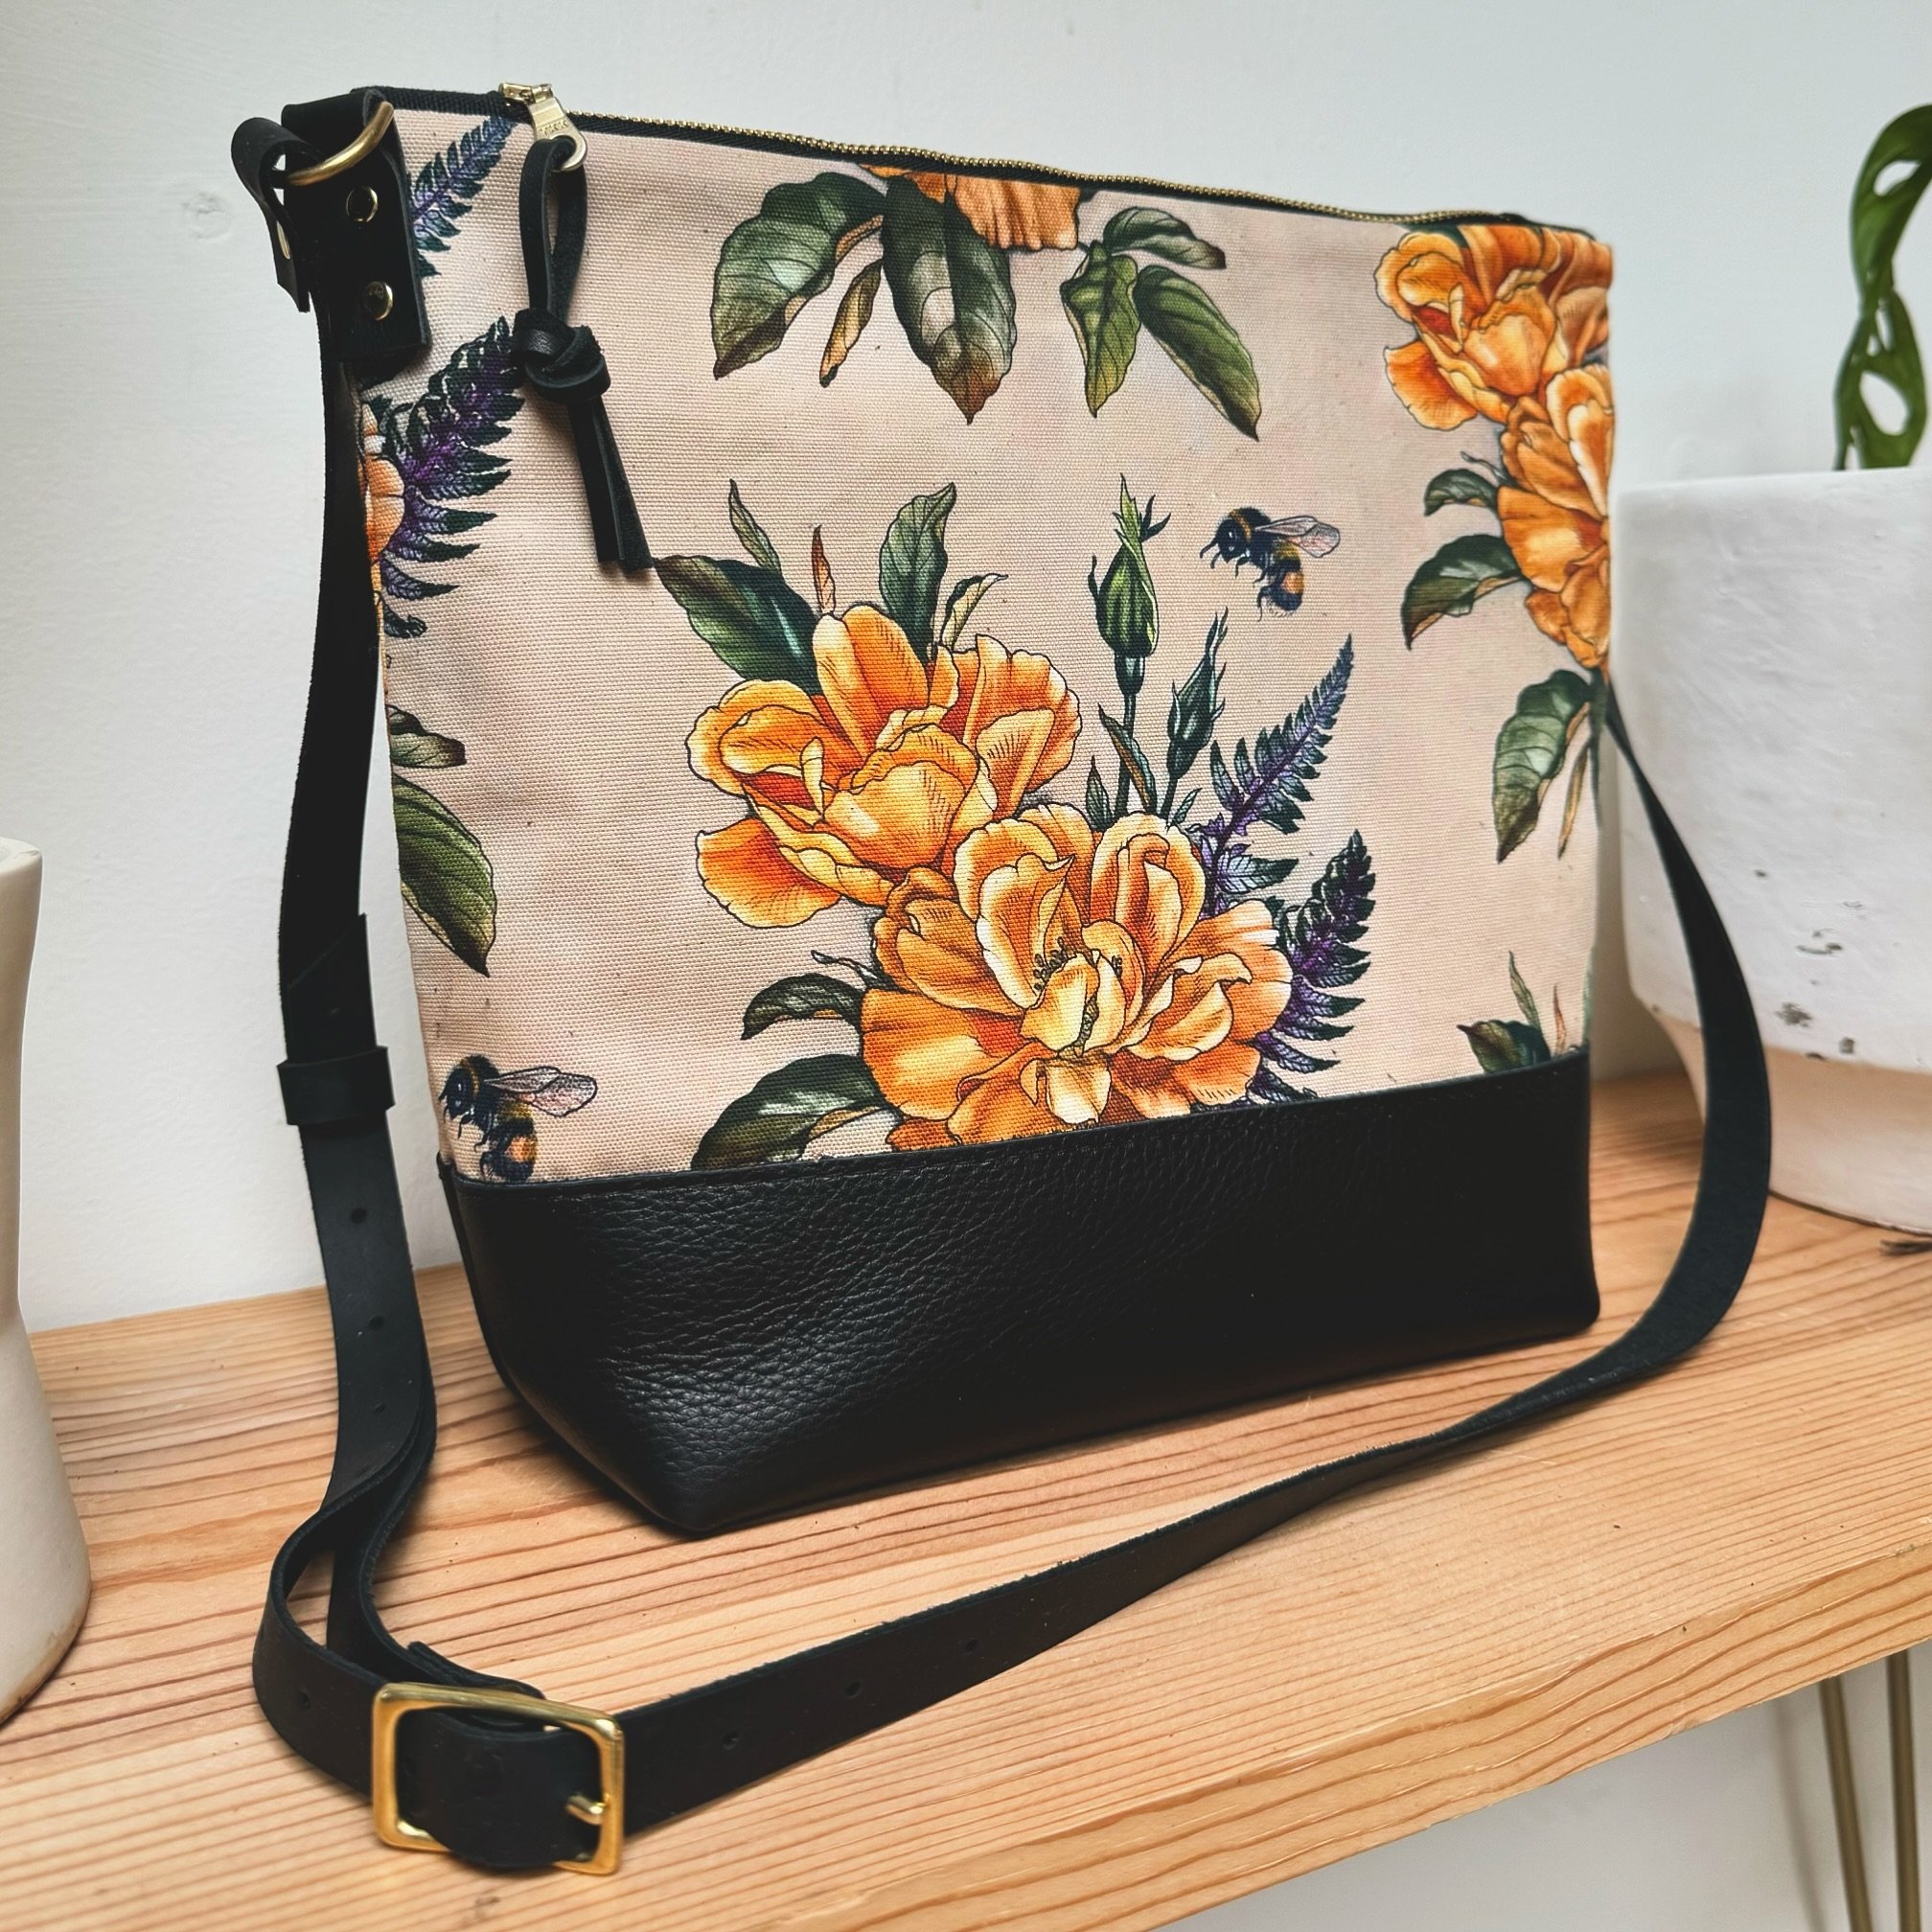 I LOVE this new bag! Our new Coco Crossbody, shown here in gorgeous fabrics designed by @alicestattoos of @wonderlandpdx 💛 in Yellow Rose with Fern &amp; Bee. 🐝 The perfect size and 4 interior pockets to organize all the essentials. Your choice of 